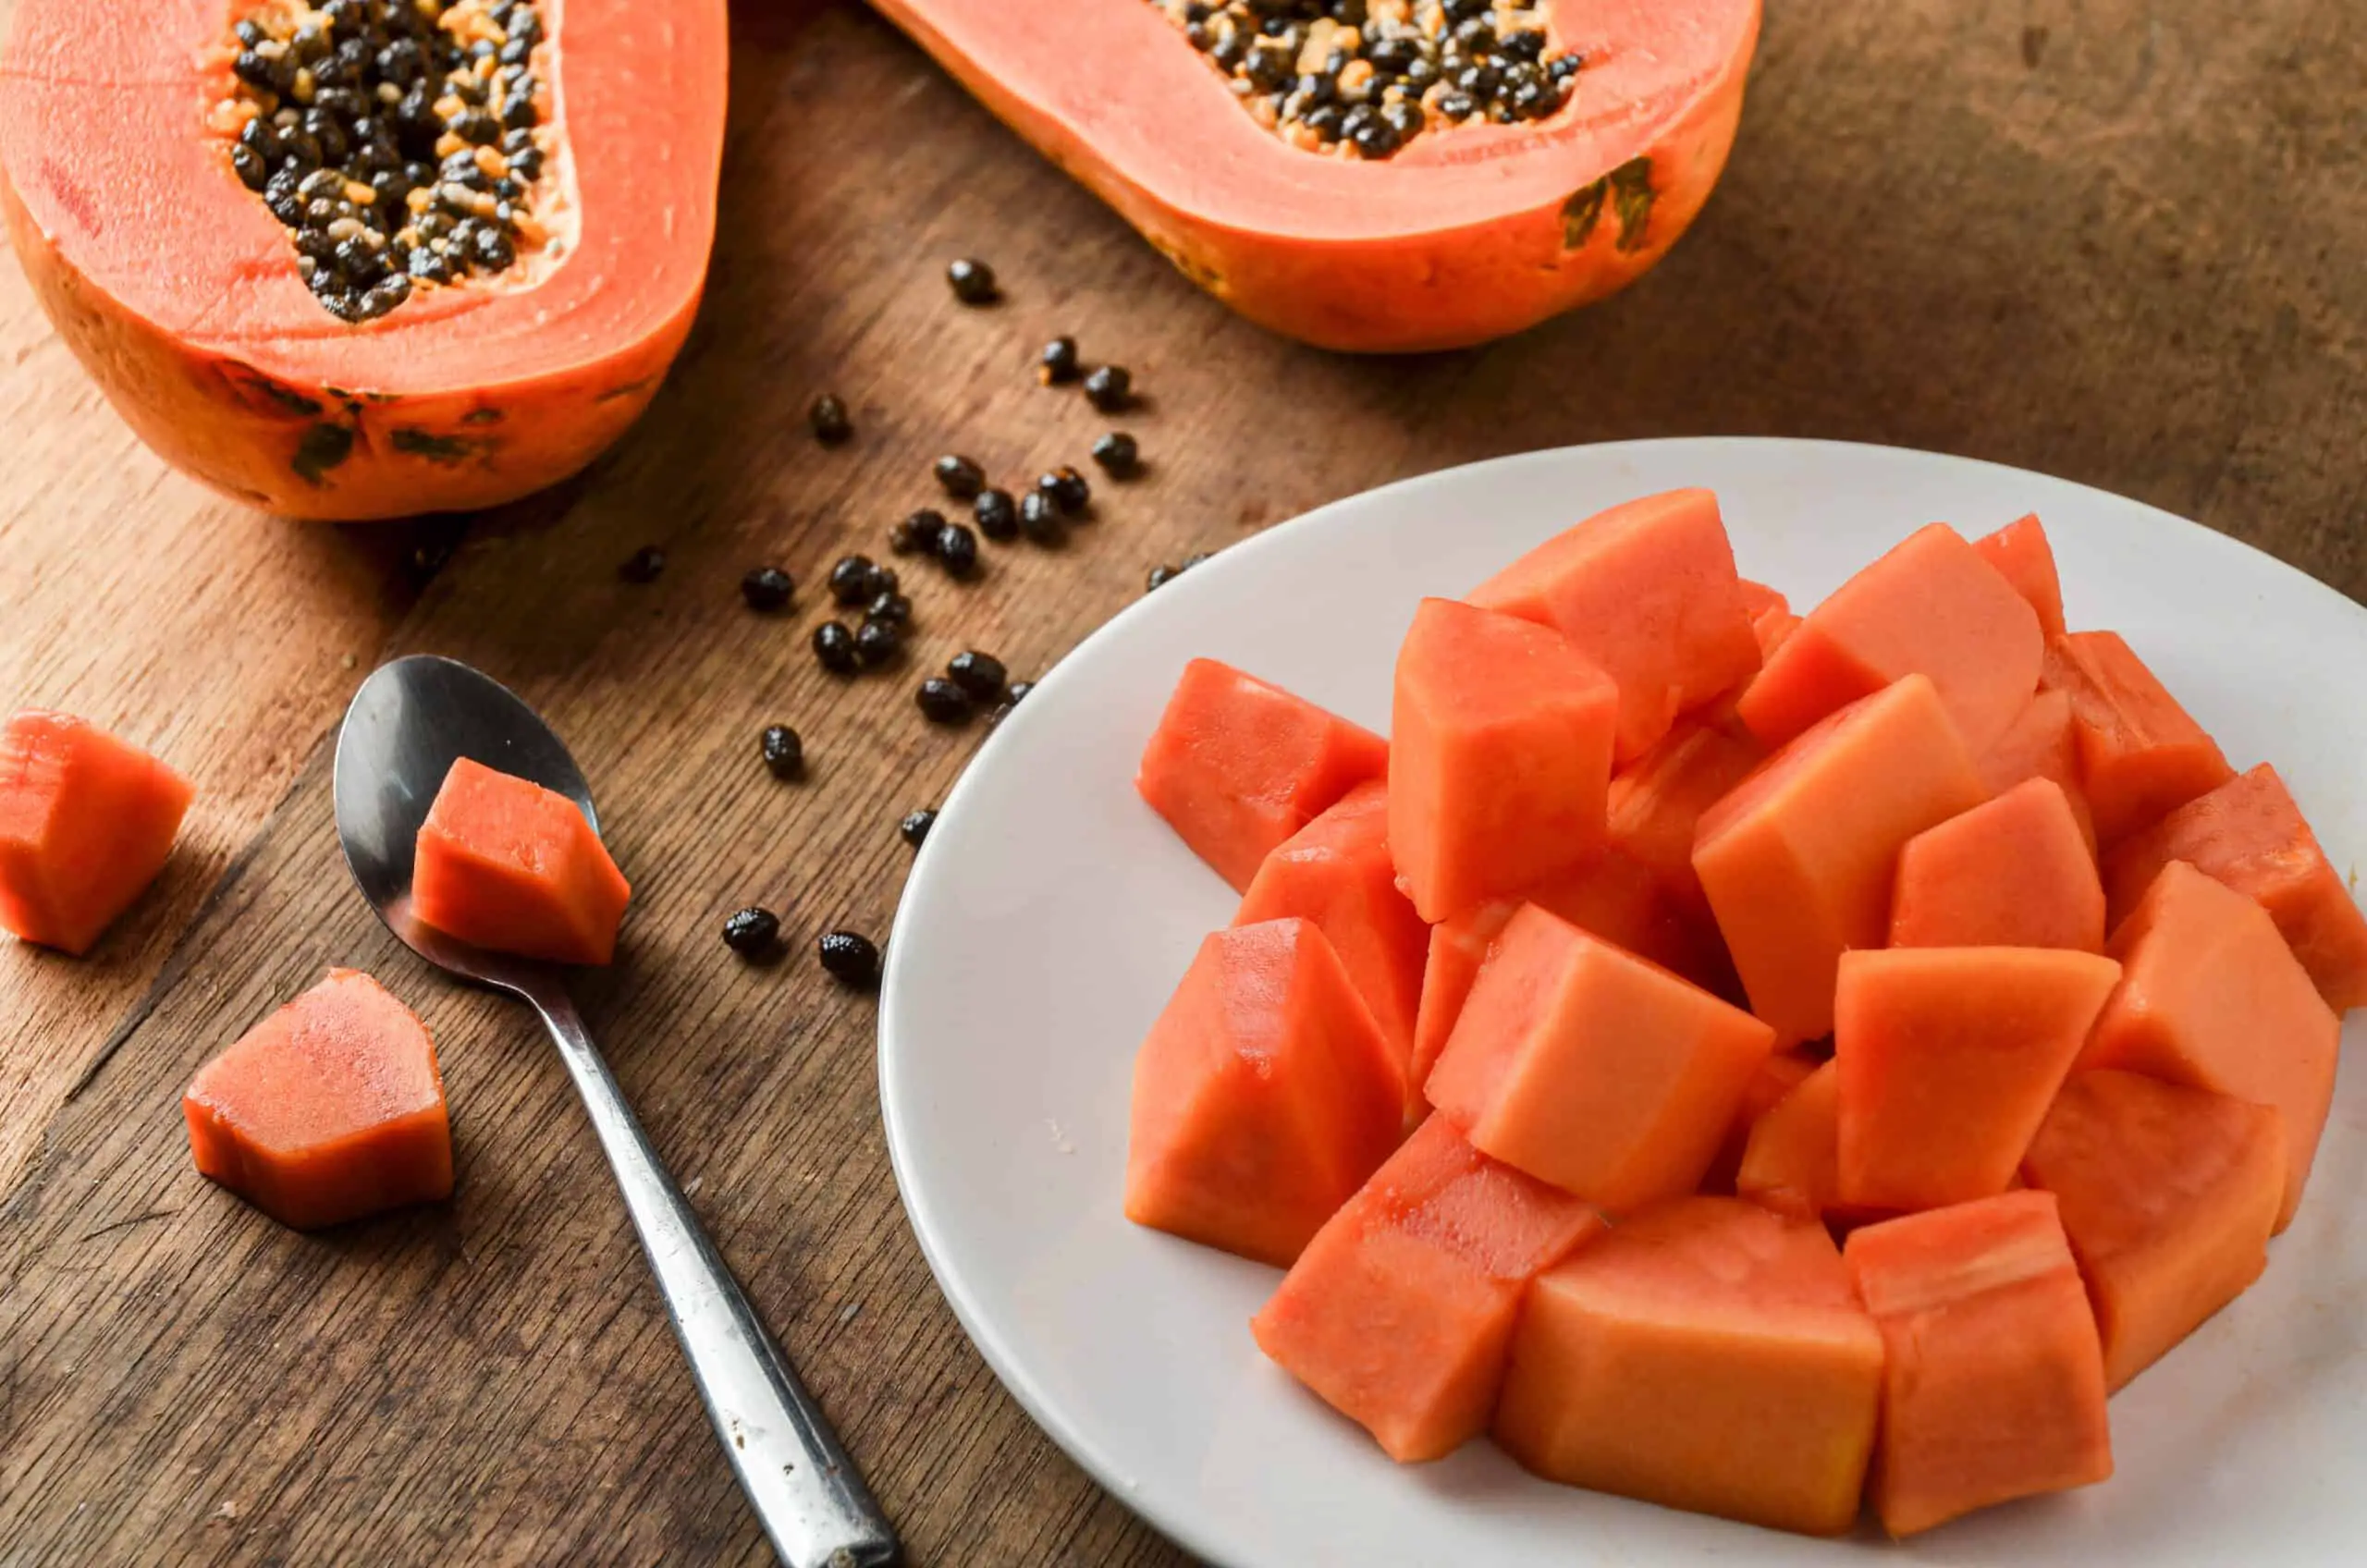 How To Cut a Papaya and How to Eat It: Step By Step